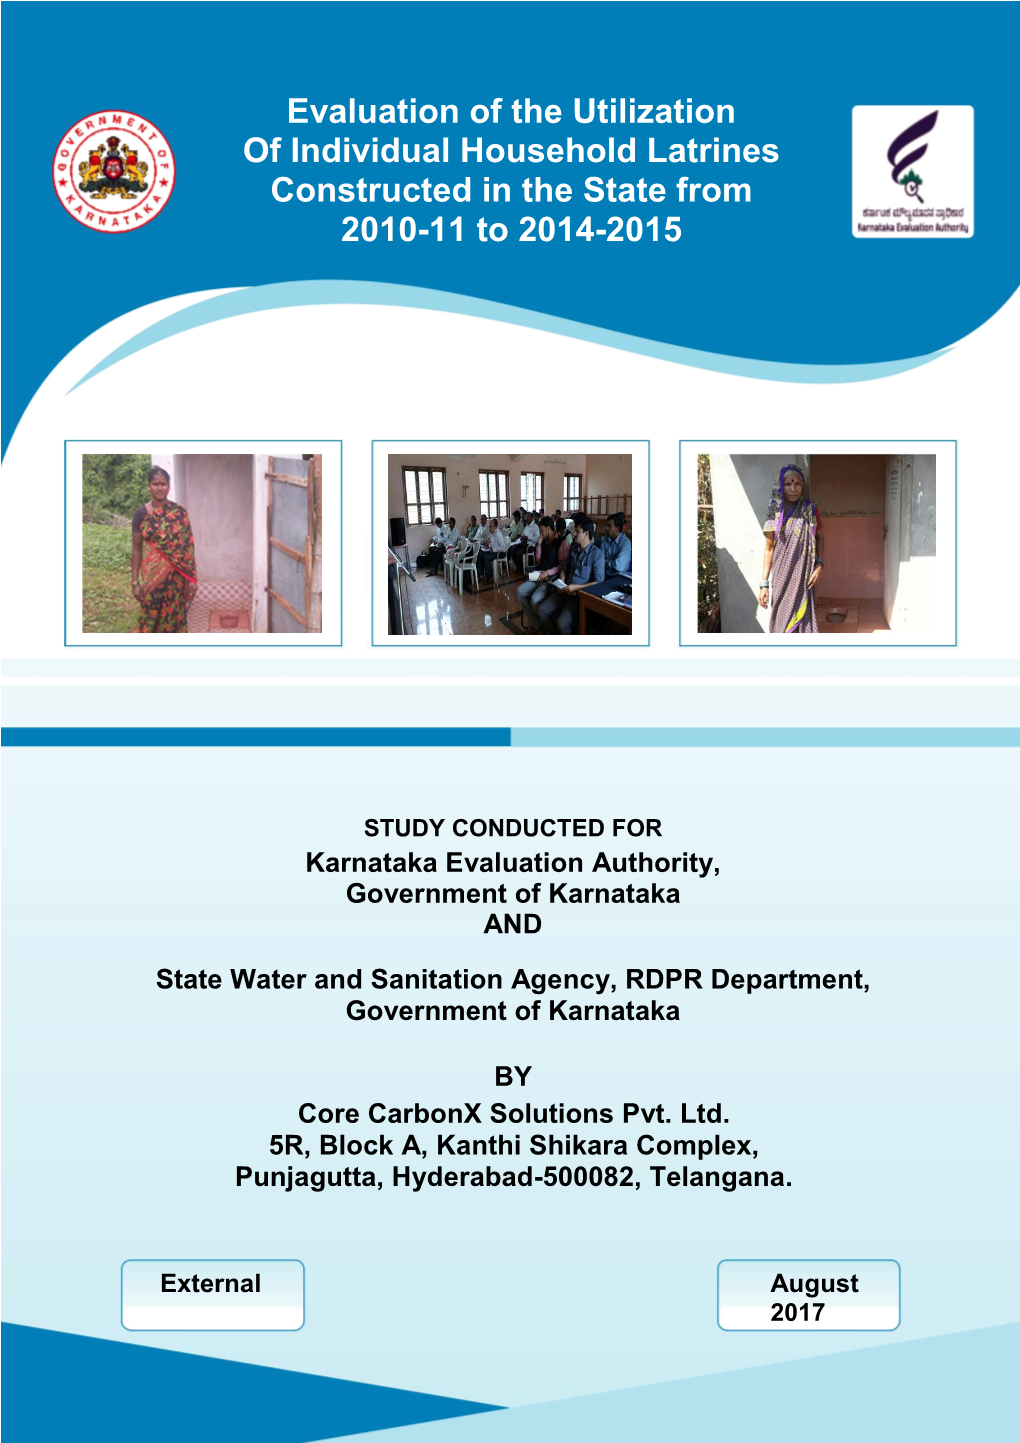 Evaluation of the Utilization of Individual Household Latrines Constructed in the State from 2010-11 to 2014-2015